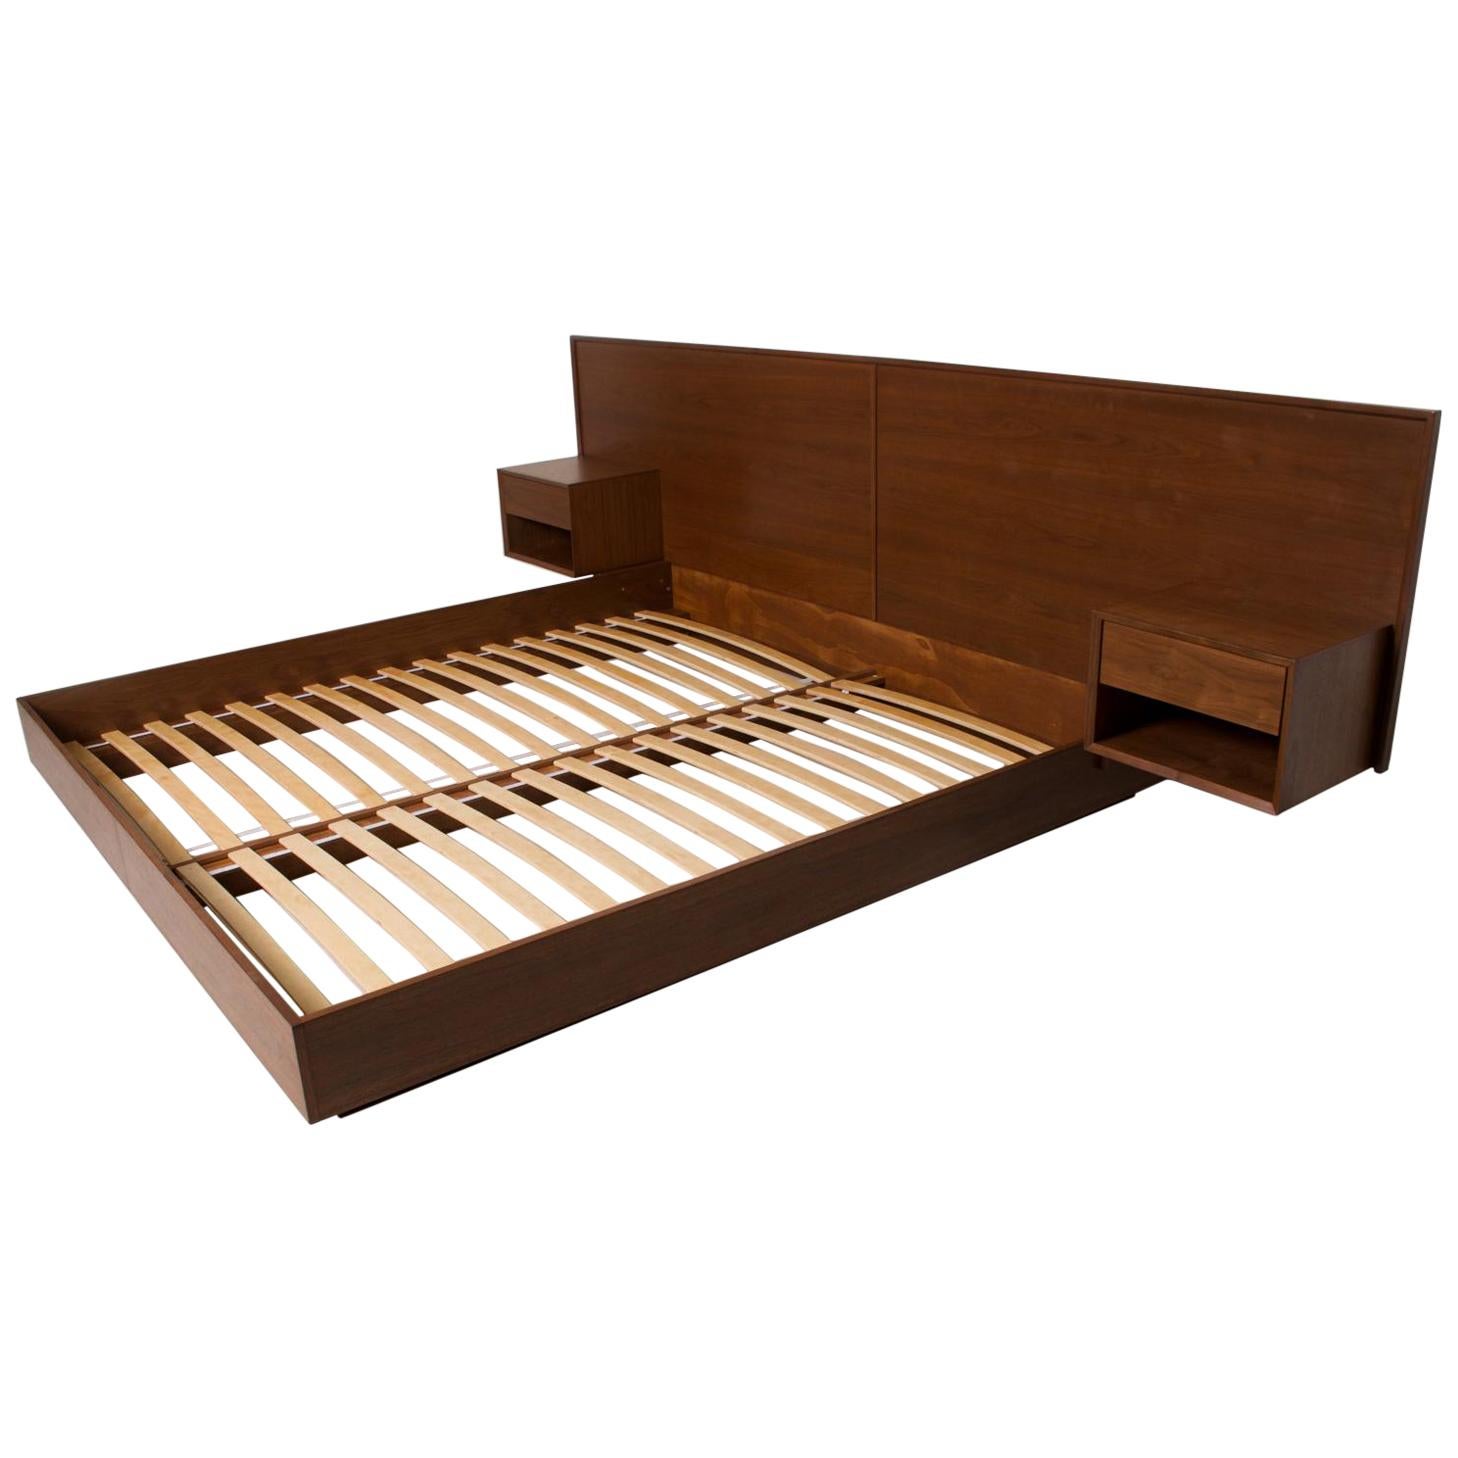 Platform Bed With Floating Nightstands, King Size Platform Bed With Built In Nightstands